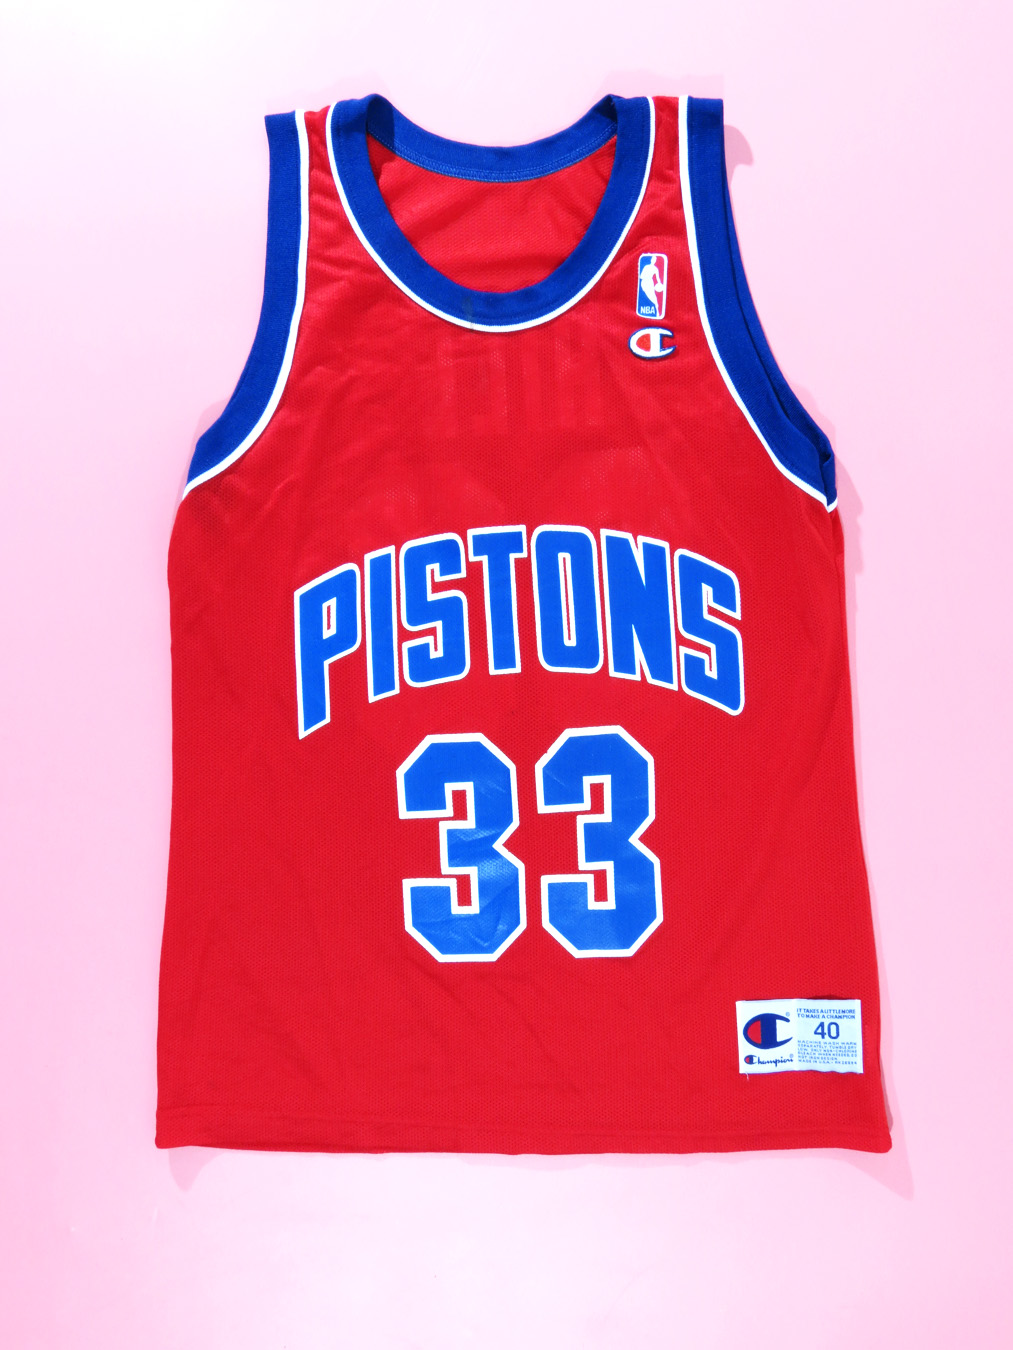 grant hill pistons jersey red